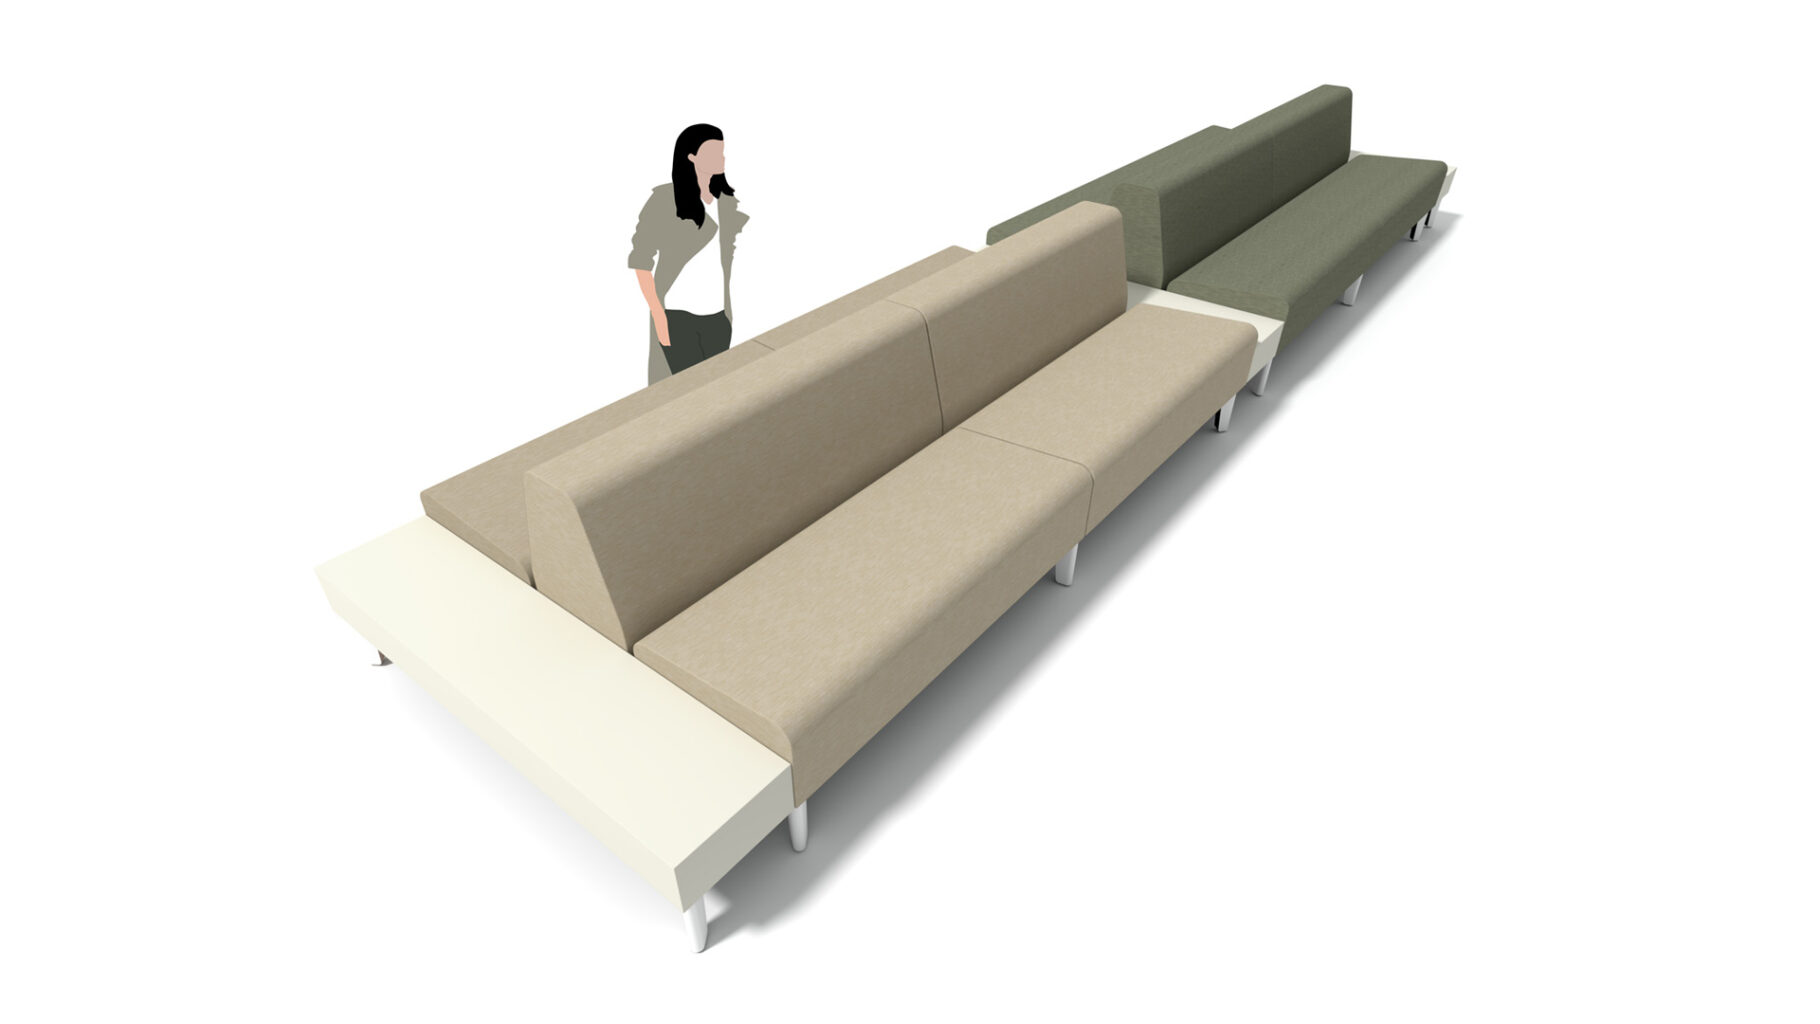 Concept C - configuration featuring an Avila double depth table, two double sided sofas, a double depth table, two double sided sofas, and a double depth table.